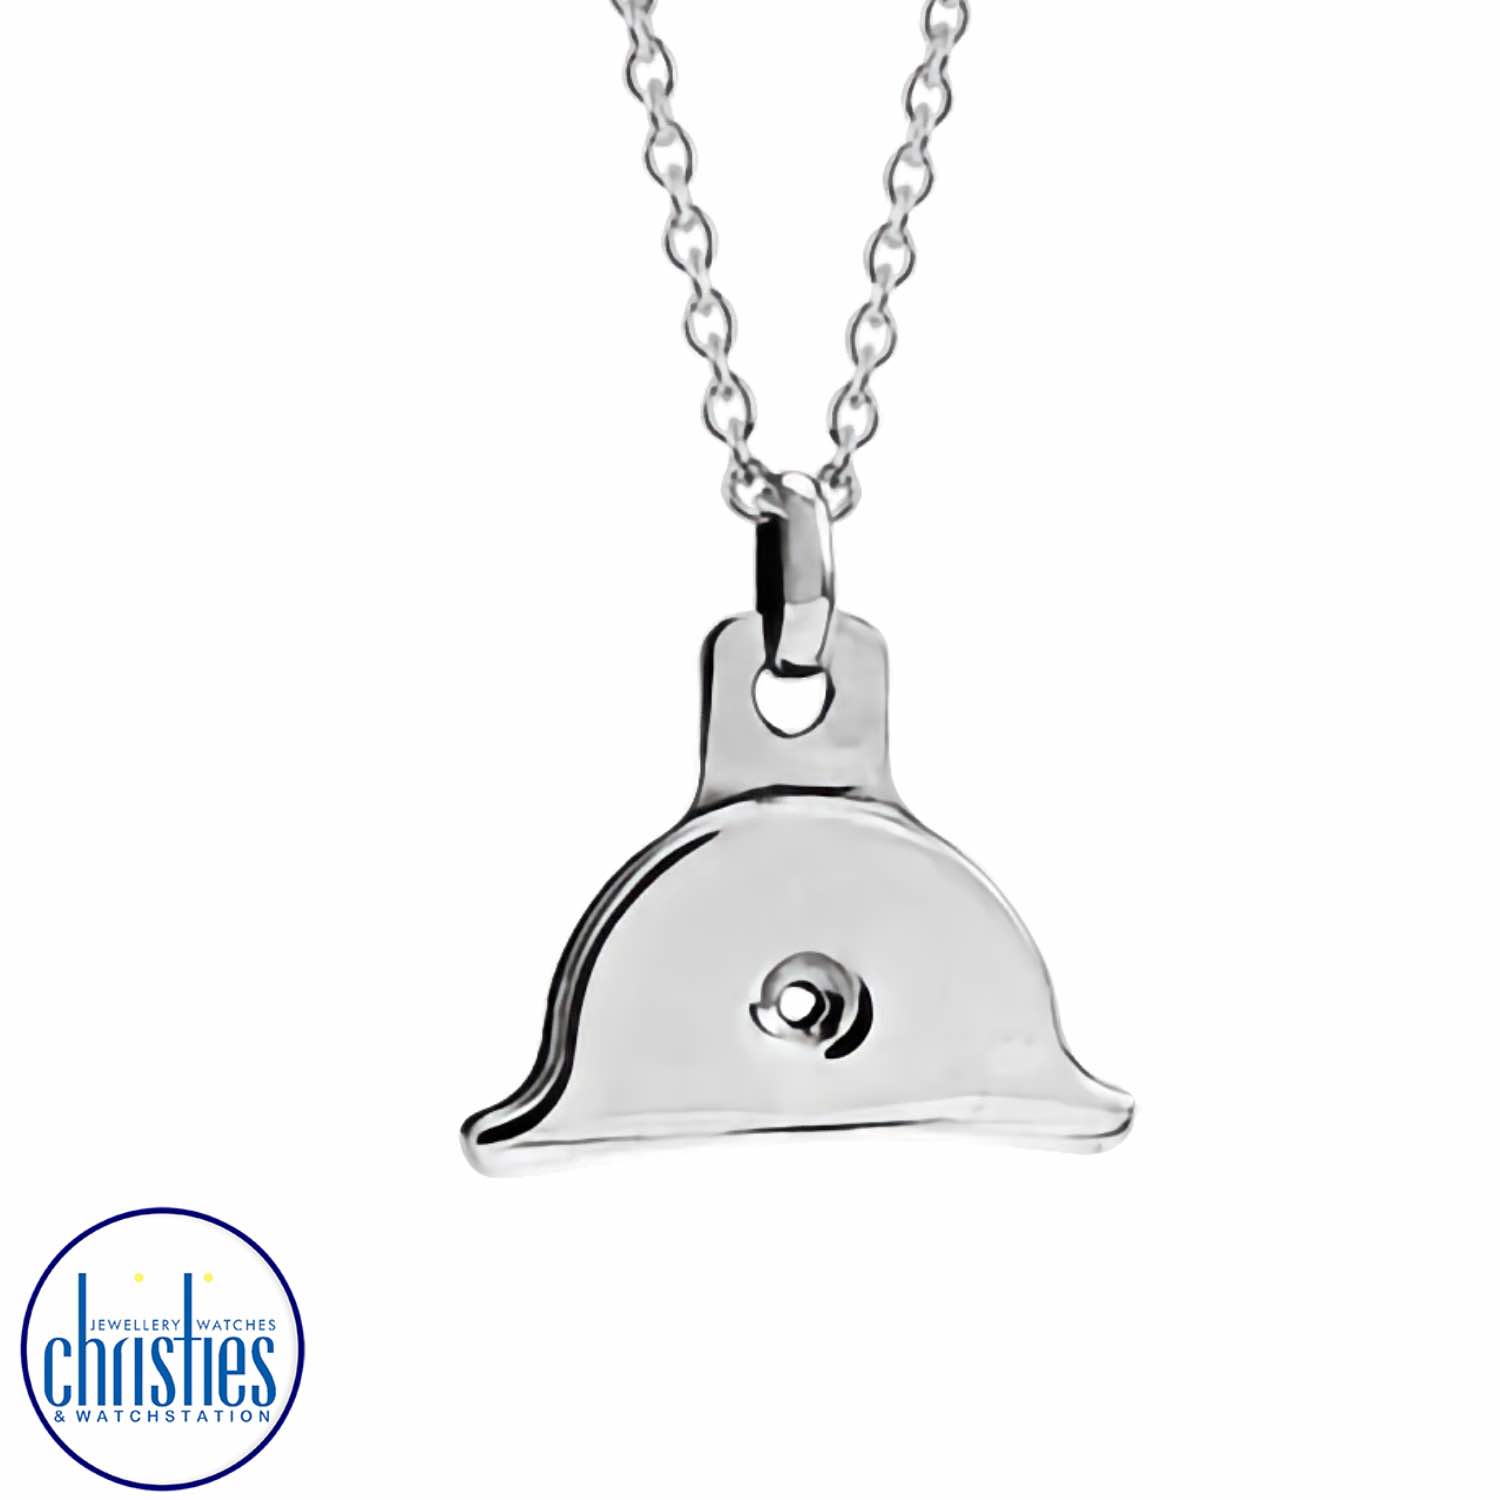 Farming Jewellery Silver Shepherds Whistle Necklace. This iconic design is a symbol of true friendship. horseshoe jewellery nz